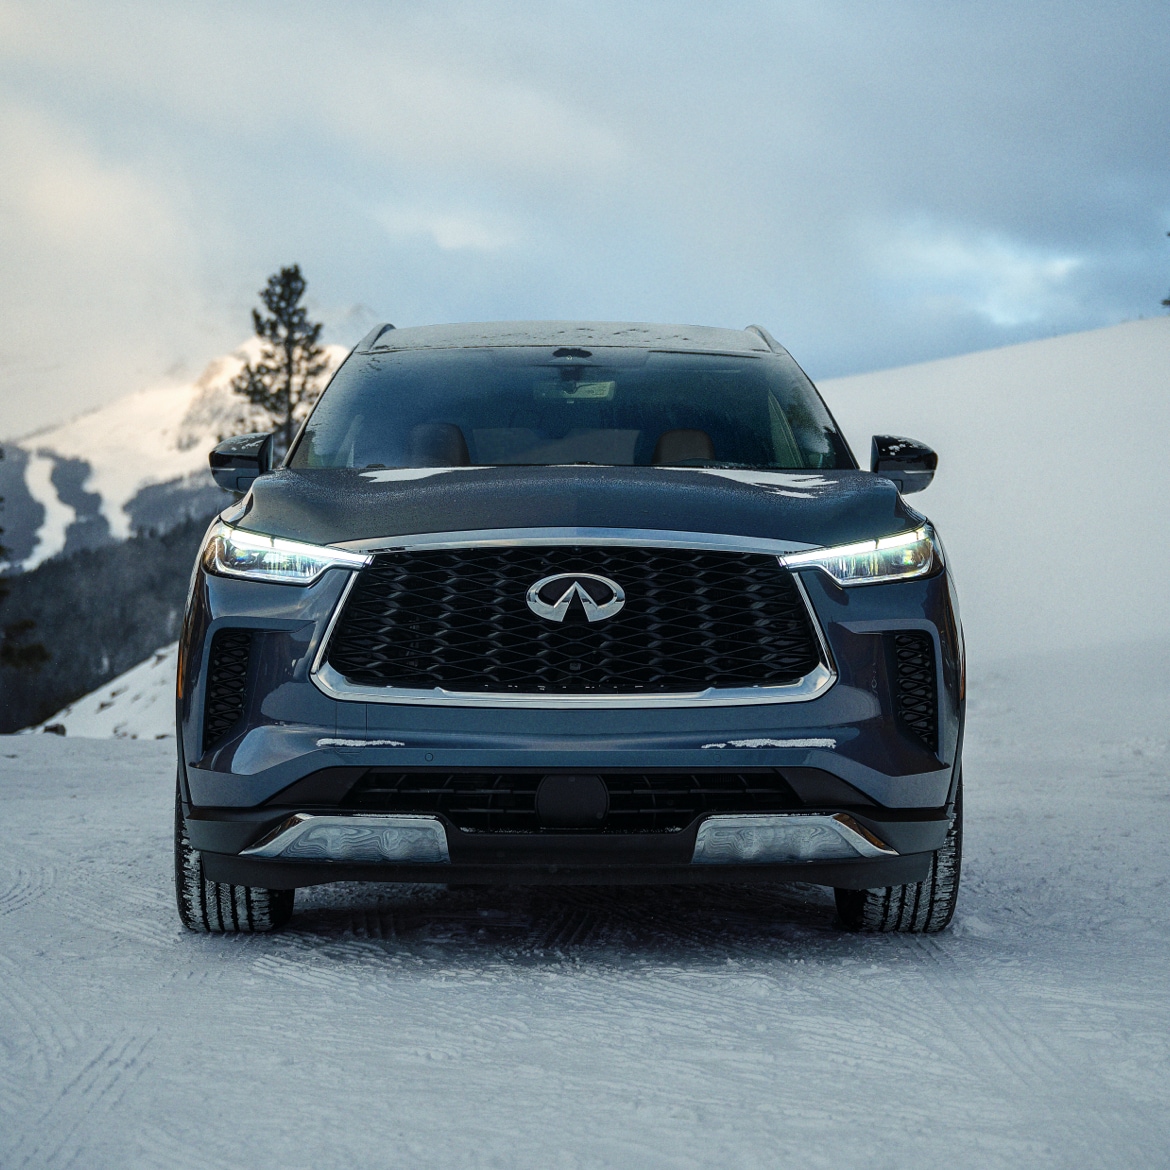 AWD INFINITI crossover driving off-road on snow